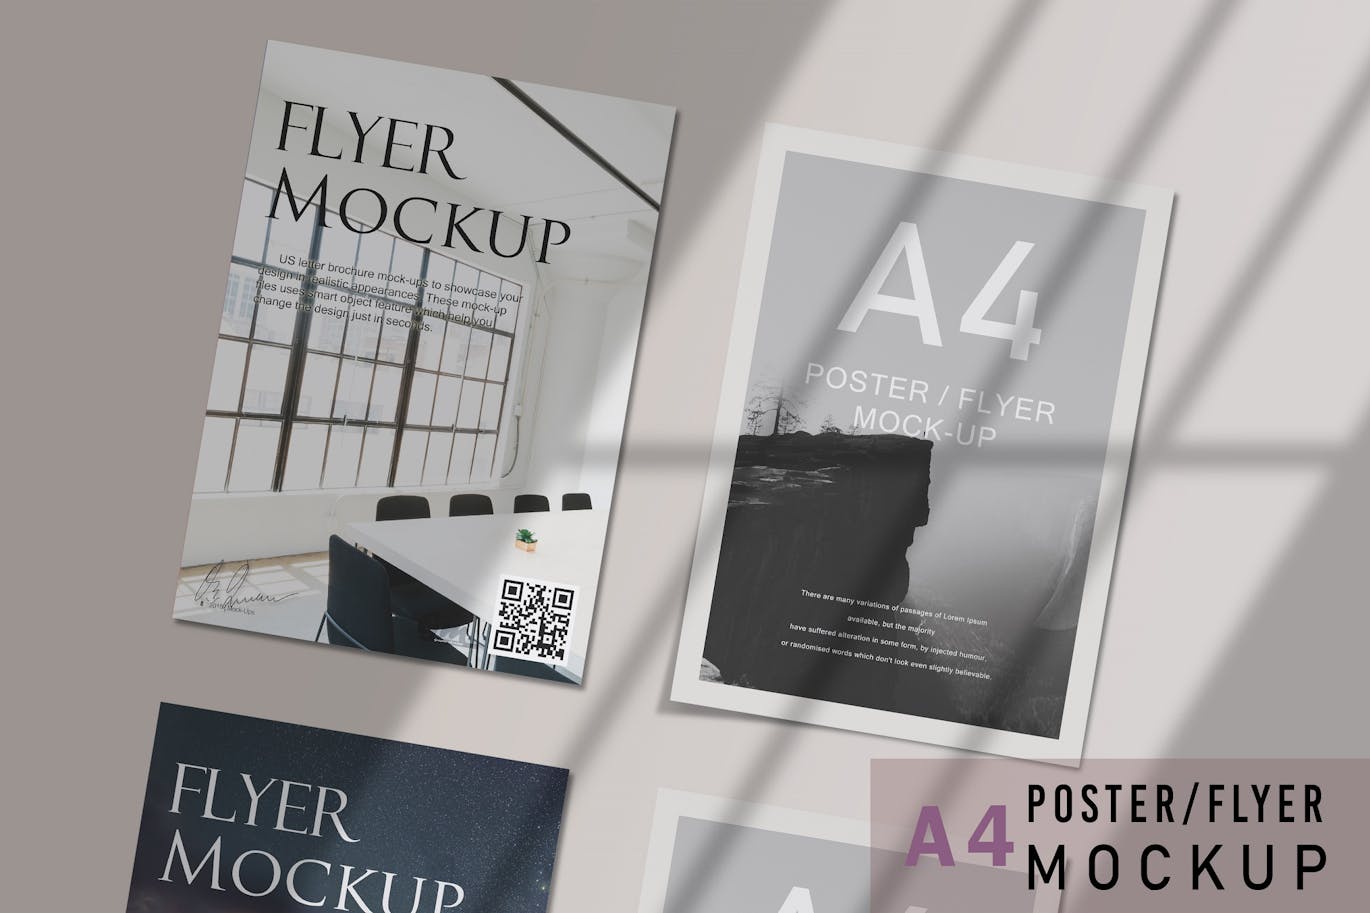 A4 Flyer Mockup Collections-10.jpg